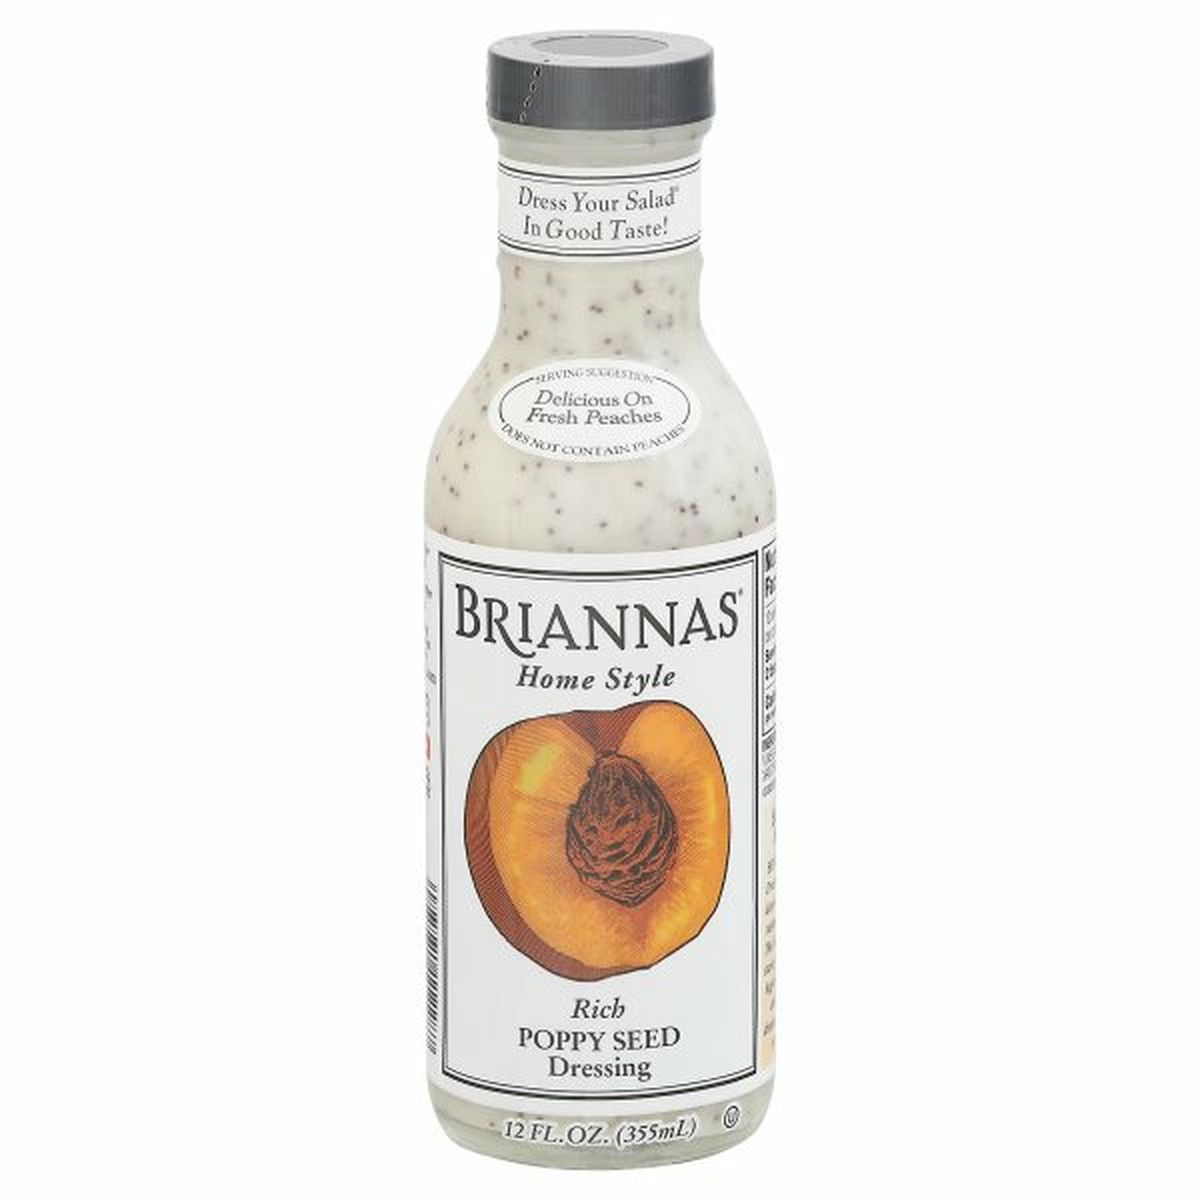 Calories in Brianna's Dressing, Poppy Seed, Rich, Home Style